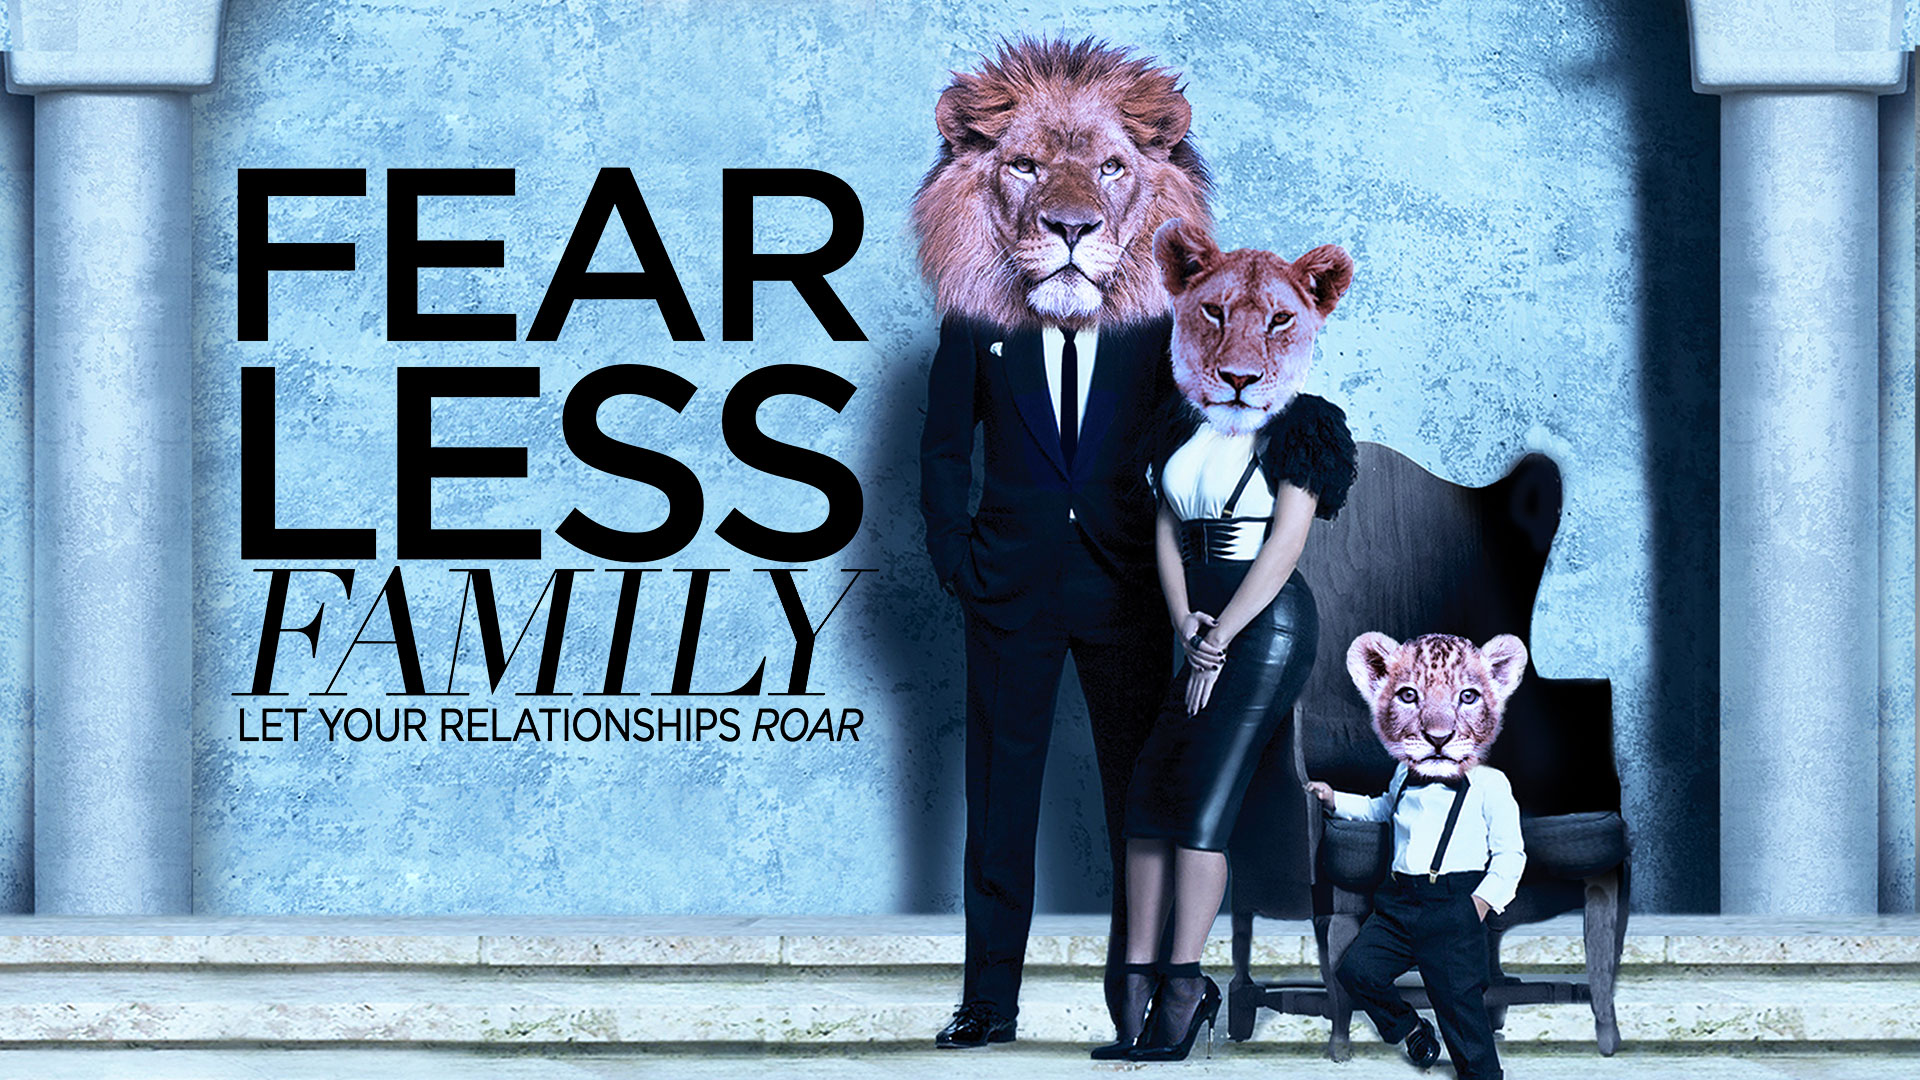  Fearless Family